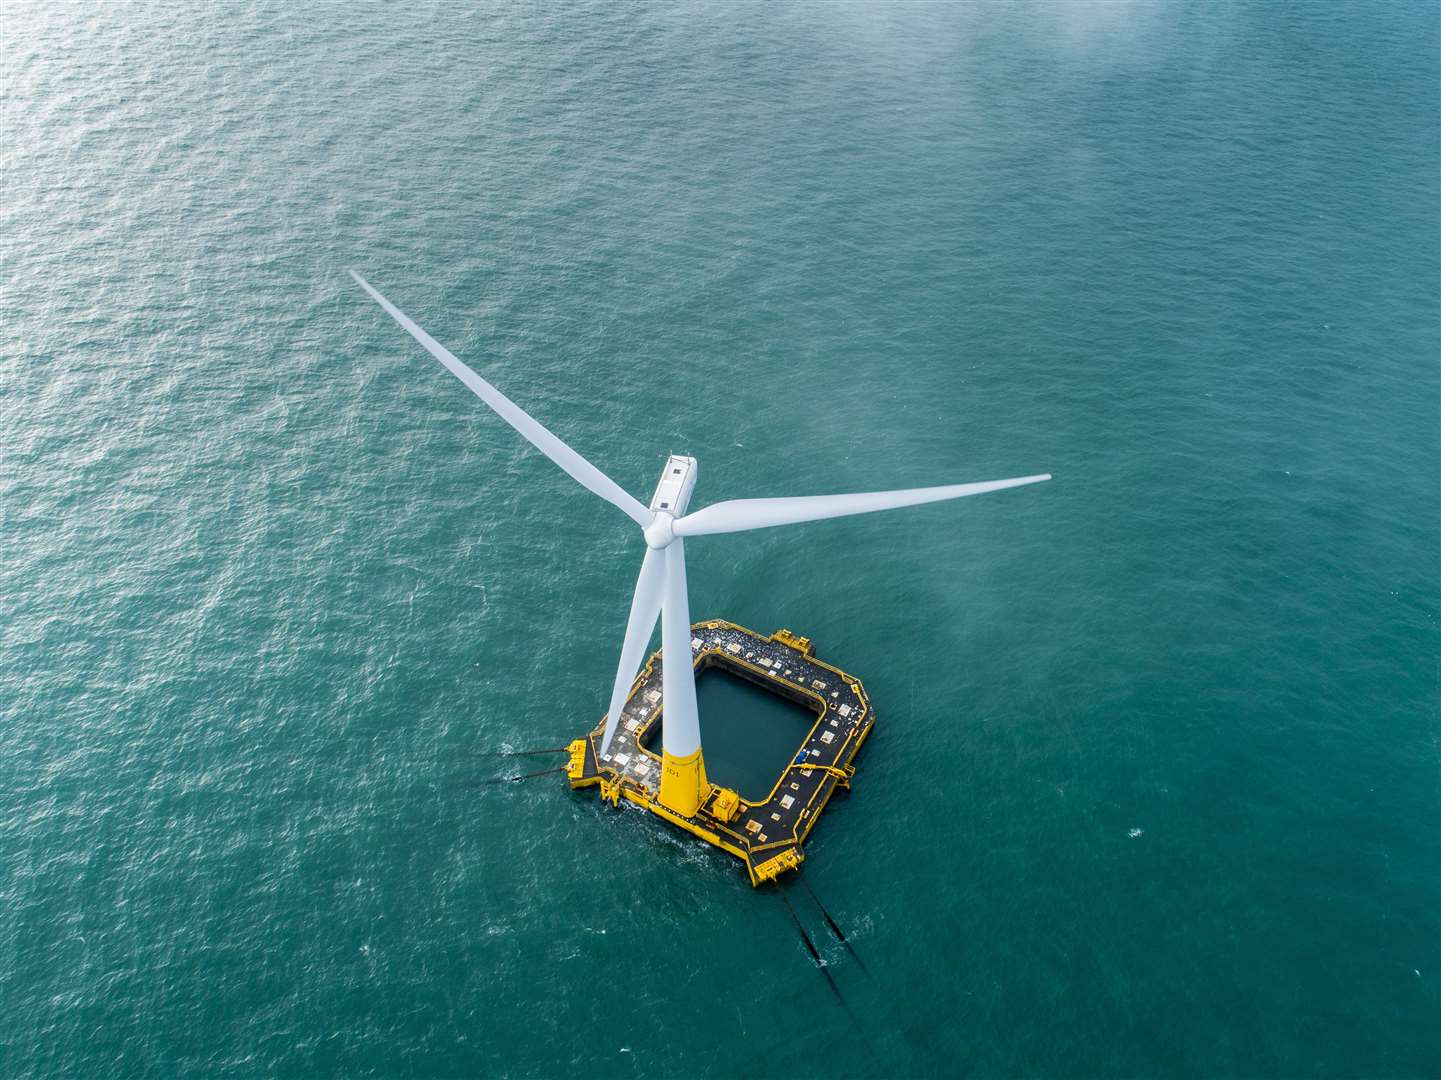 Any offshore wind turbine structures would be based in existing BW Ideol technology, similar to this offshore turbine in the Bay of Biscay.